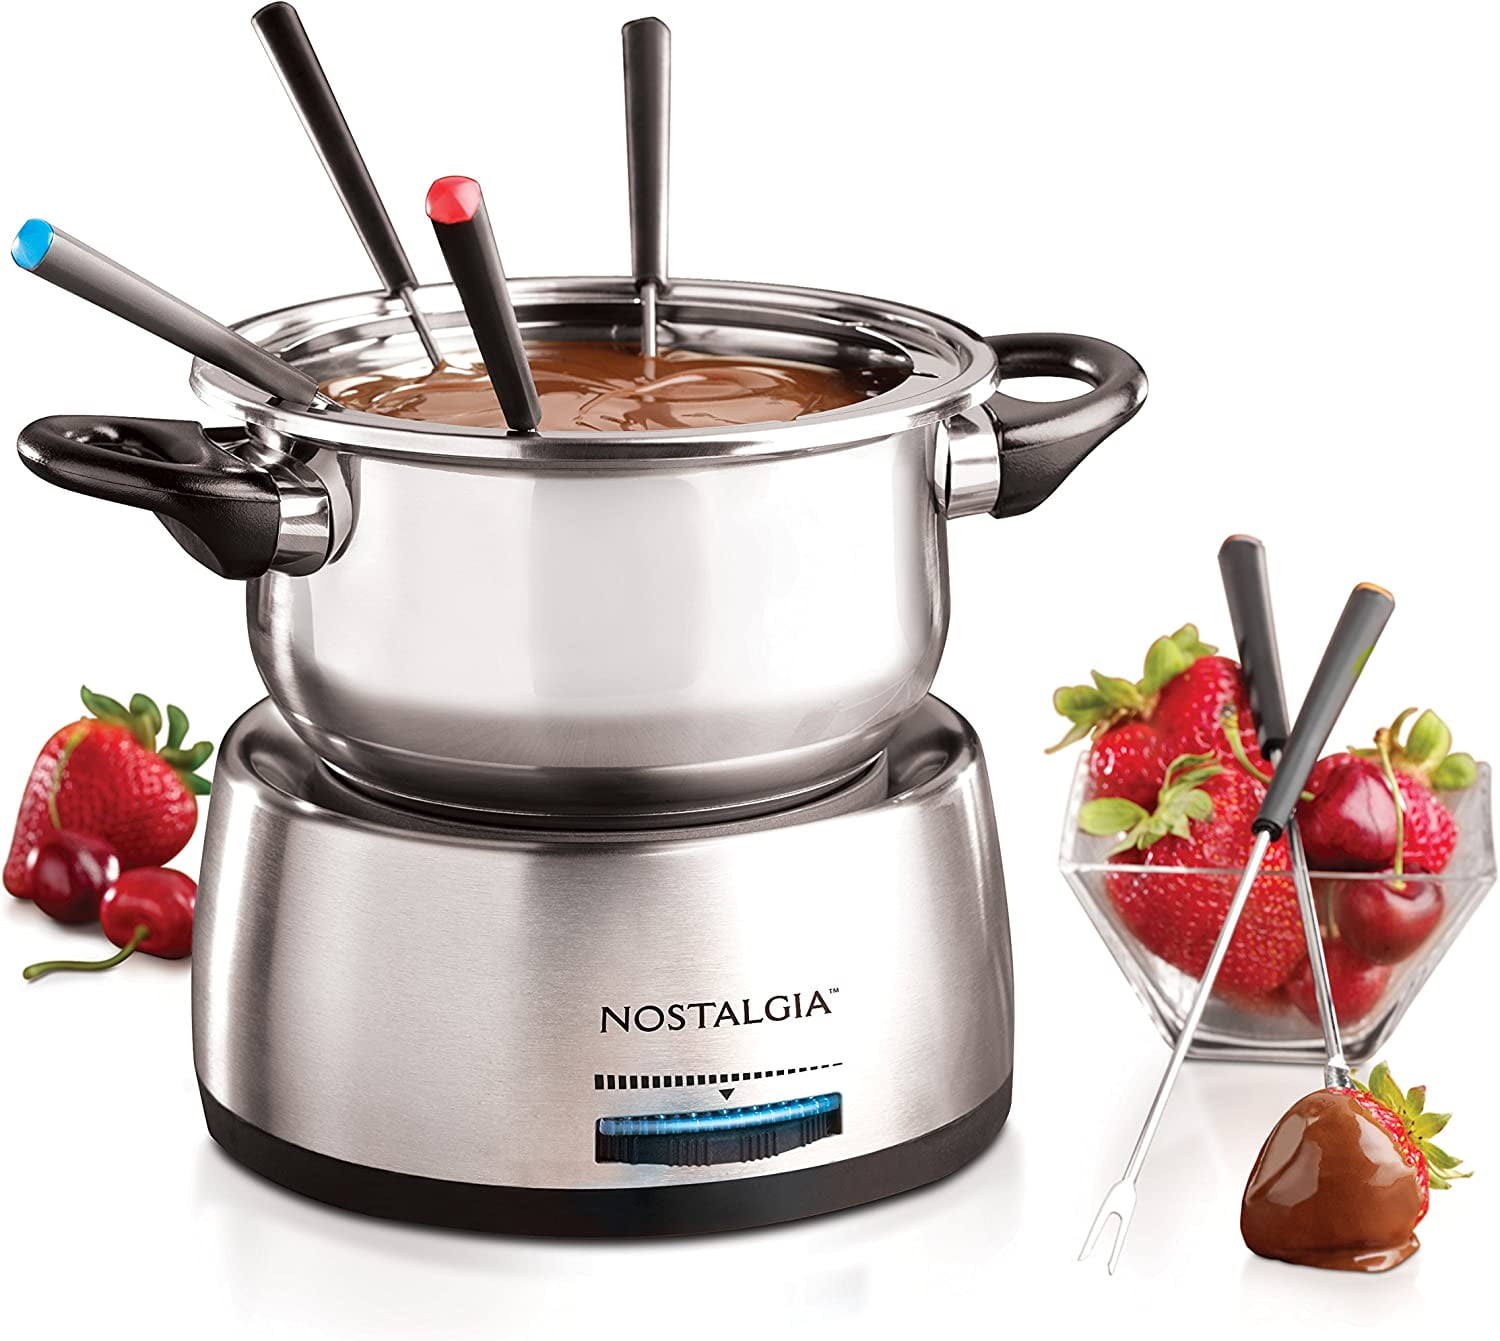 Mini Stainless Steel Fondue Pot Set Cheese Chocolate Fondue 6 Dipping Forks  And Removable Pot Melts